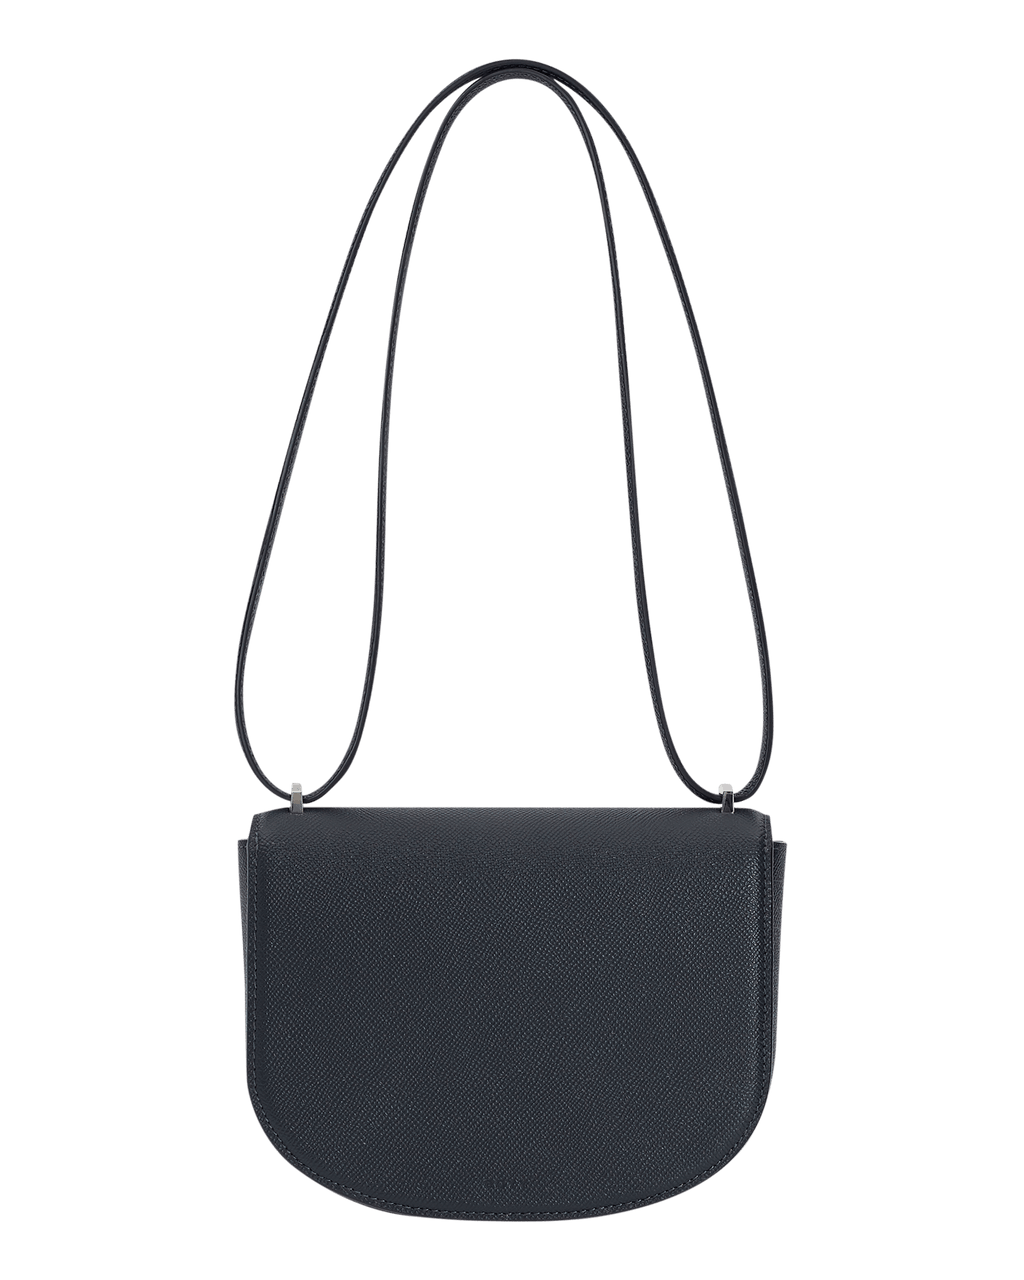 Small, blue grained leather handbag, a large silver buckle on the front flap closure, and a shoulder strap